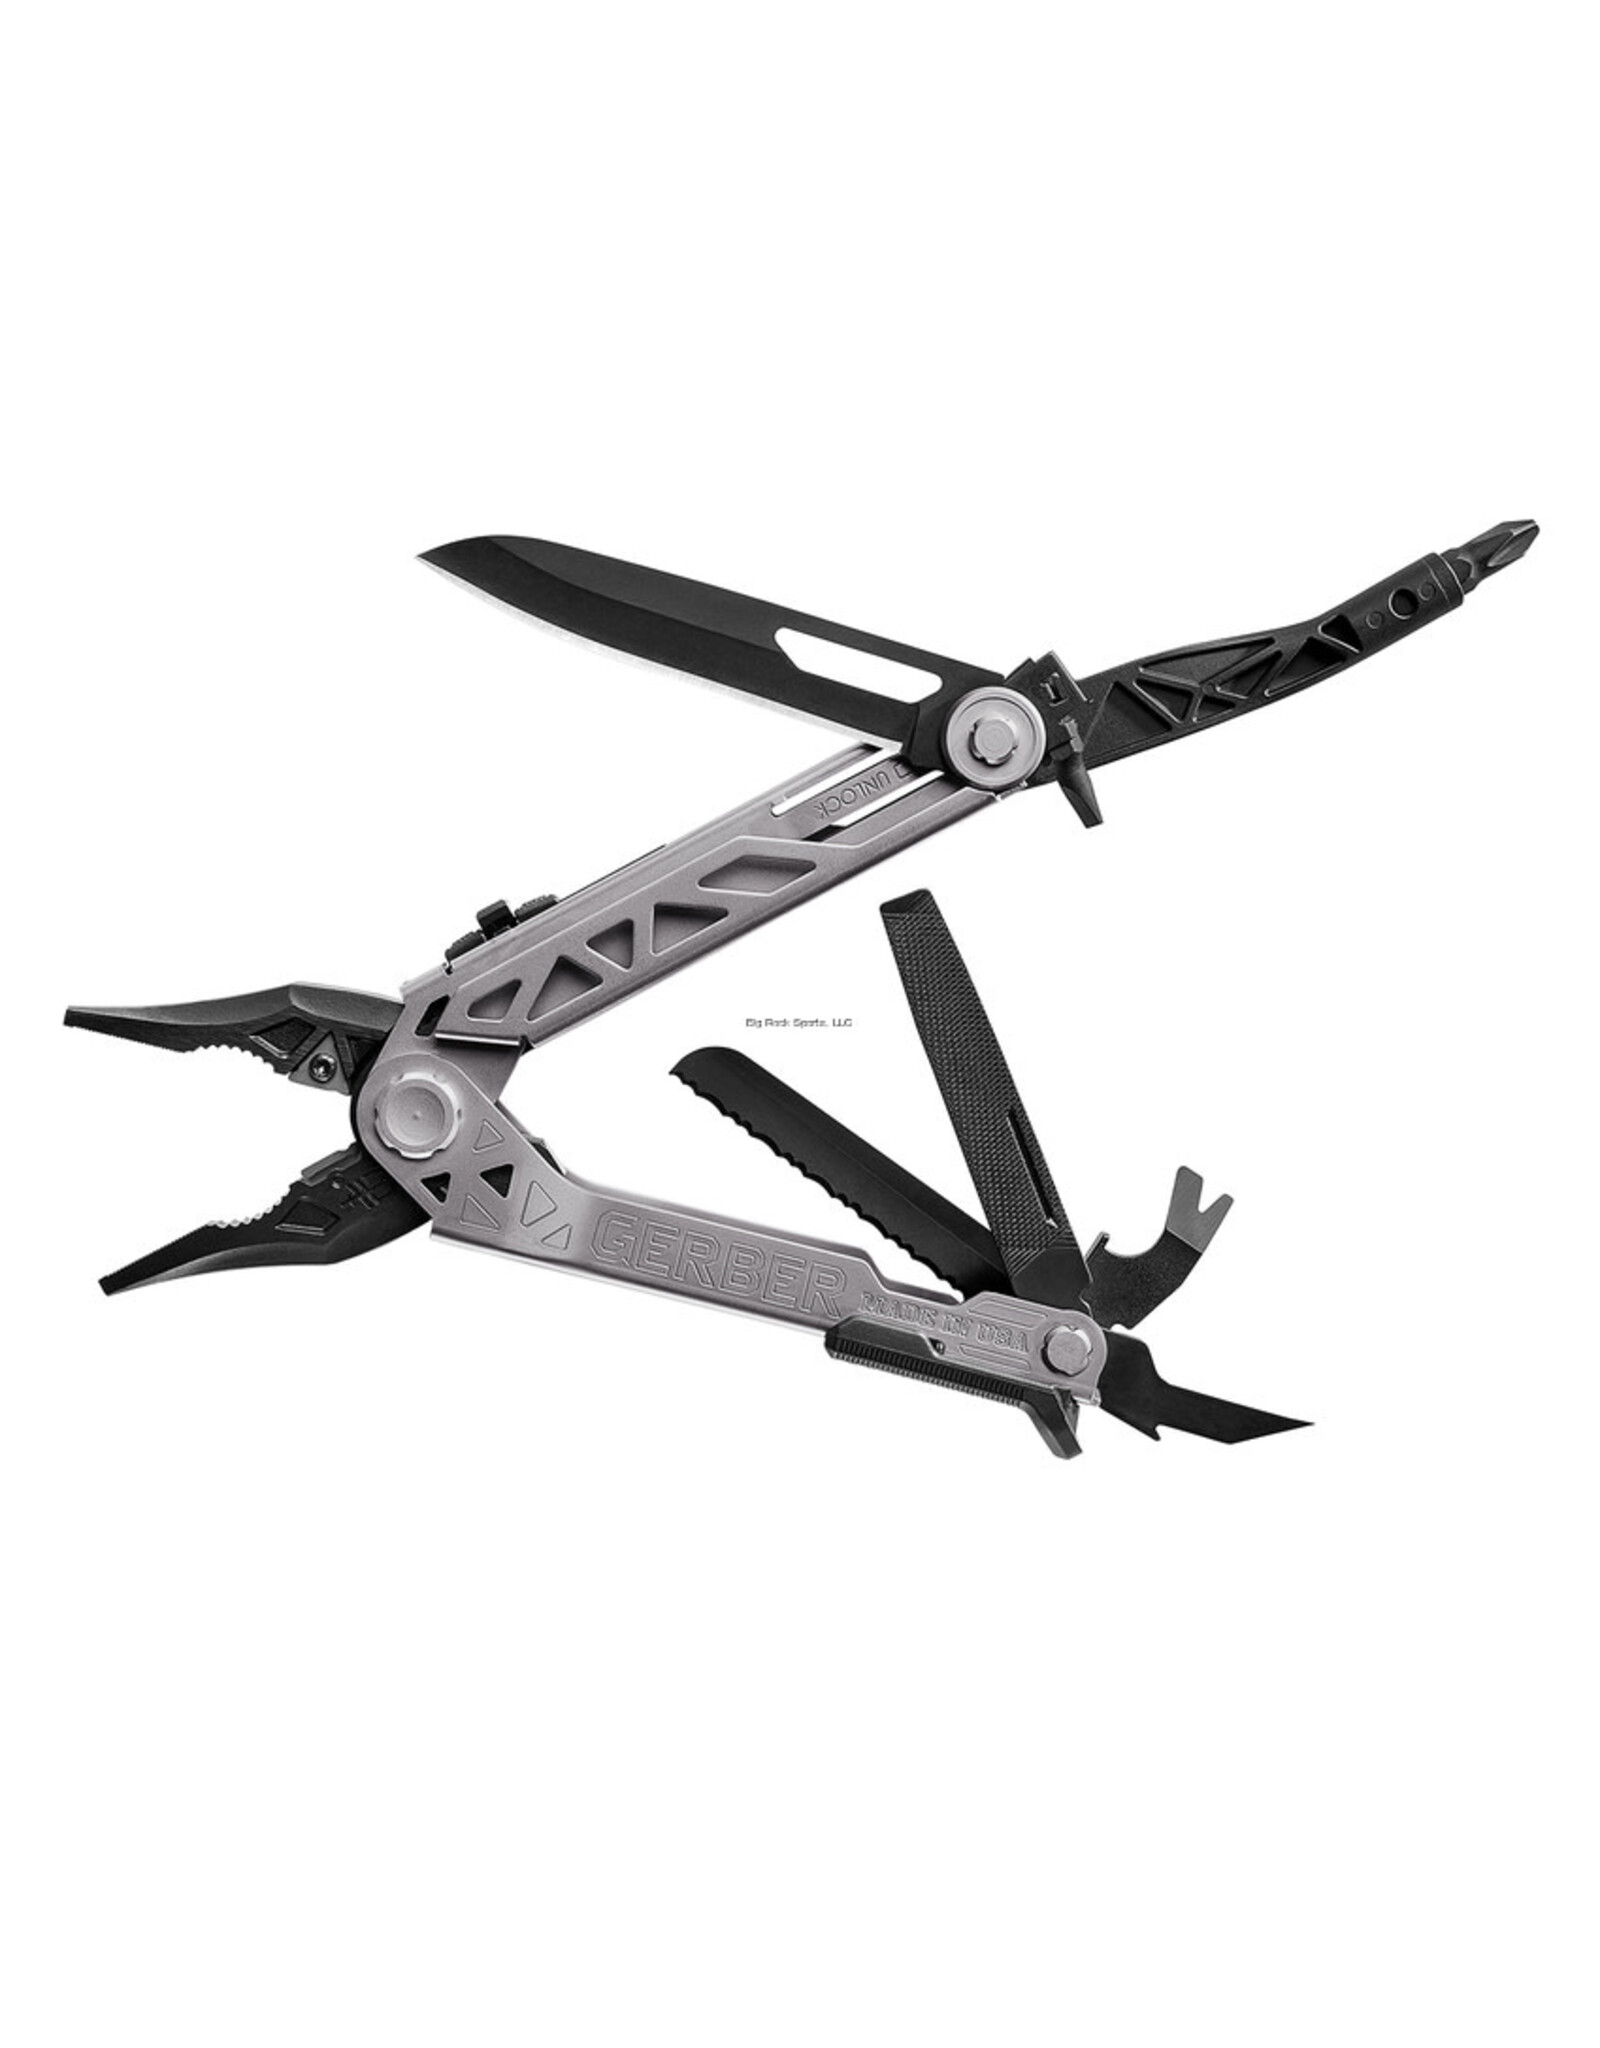 GERBER TOOLS Gerber 30-001194 Center-Drive Multi Tool, One hand opening, Center axis driver, Full size blade, 14 tools, 12 piece bit set, box